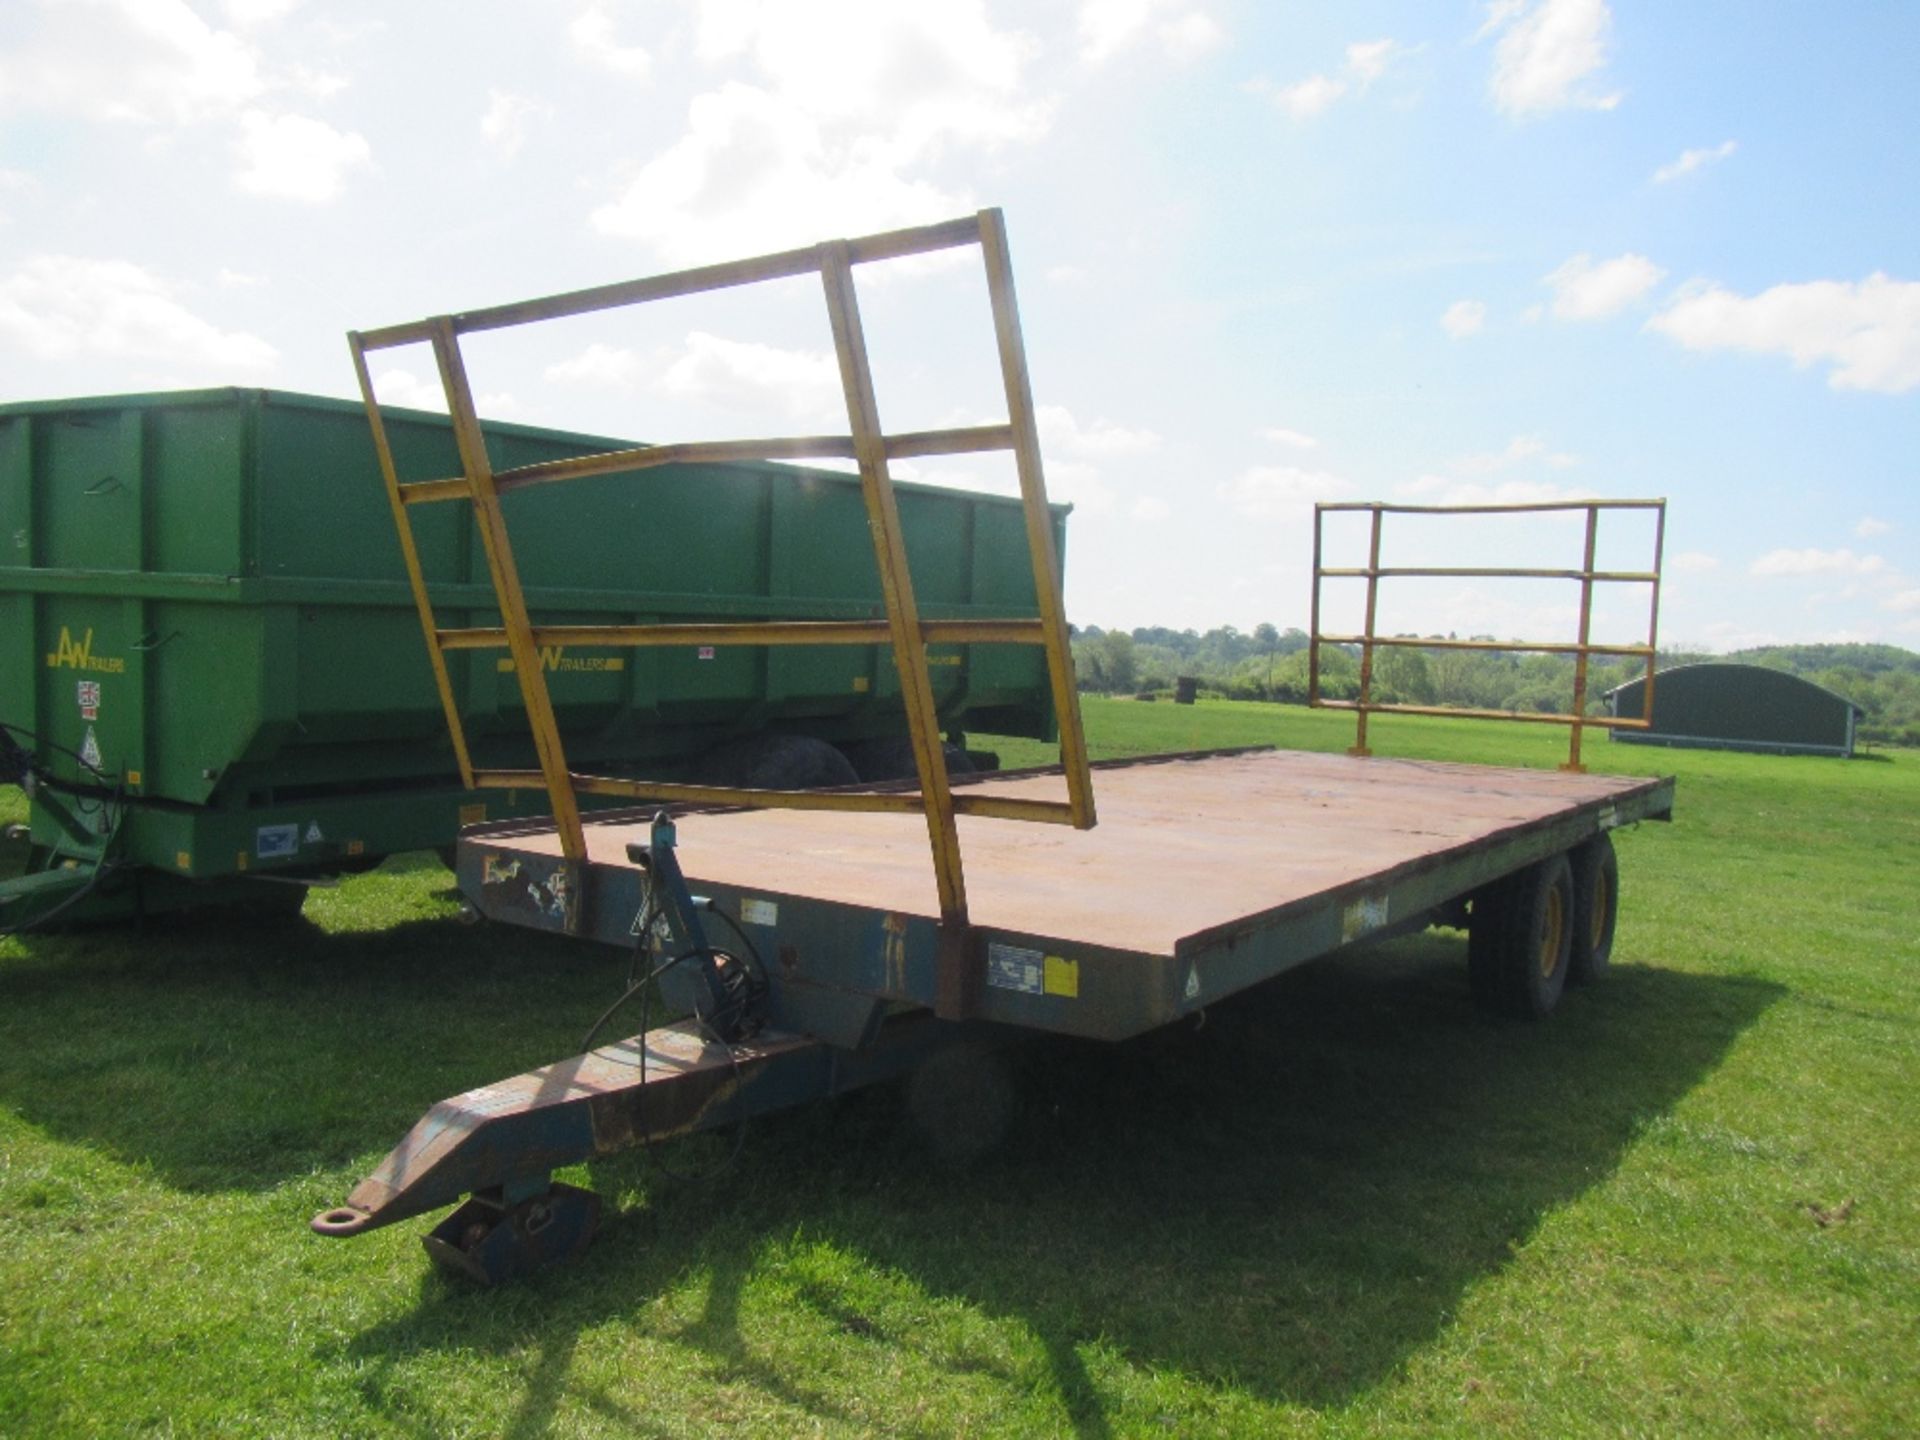 1995 12tonne tandem axle 21ft steel flat bed trailer Serial No. 1095MAY501 - Image 2 of 5